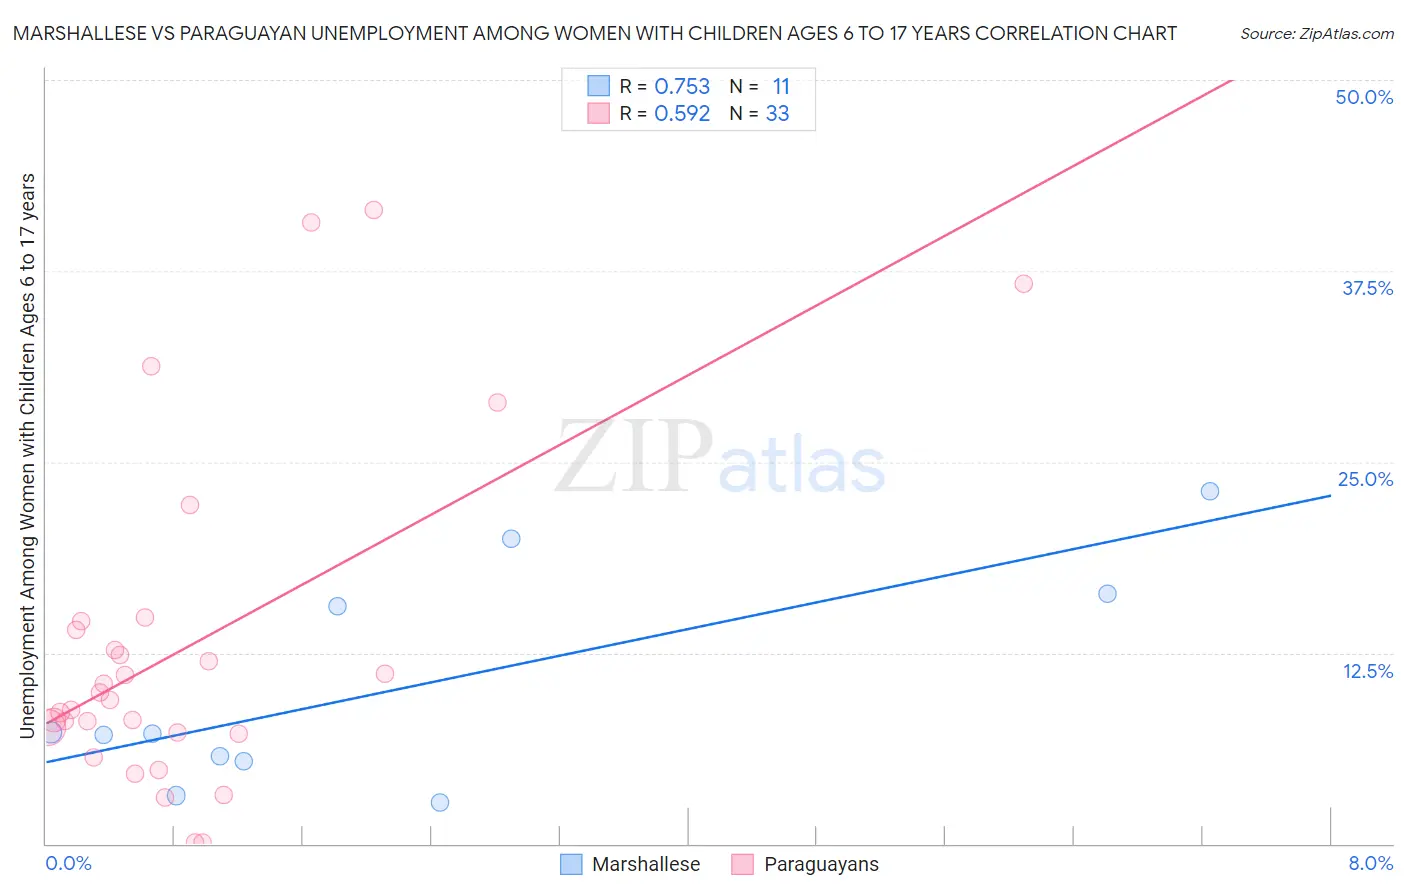 Marshallese vs Paraguayan Unemployment Among Women with Children Ages 6 to 17 years